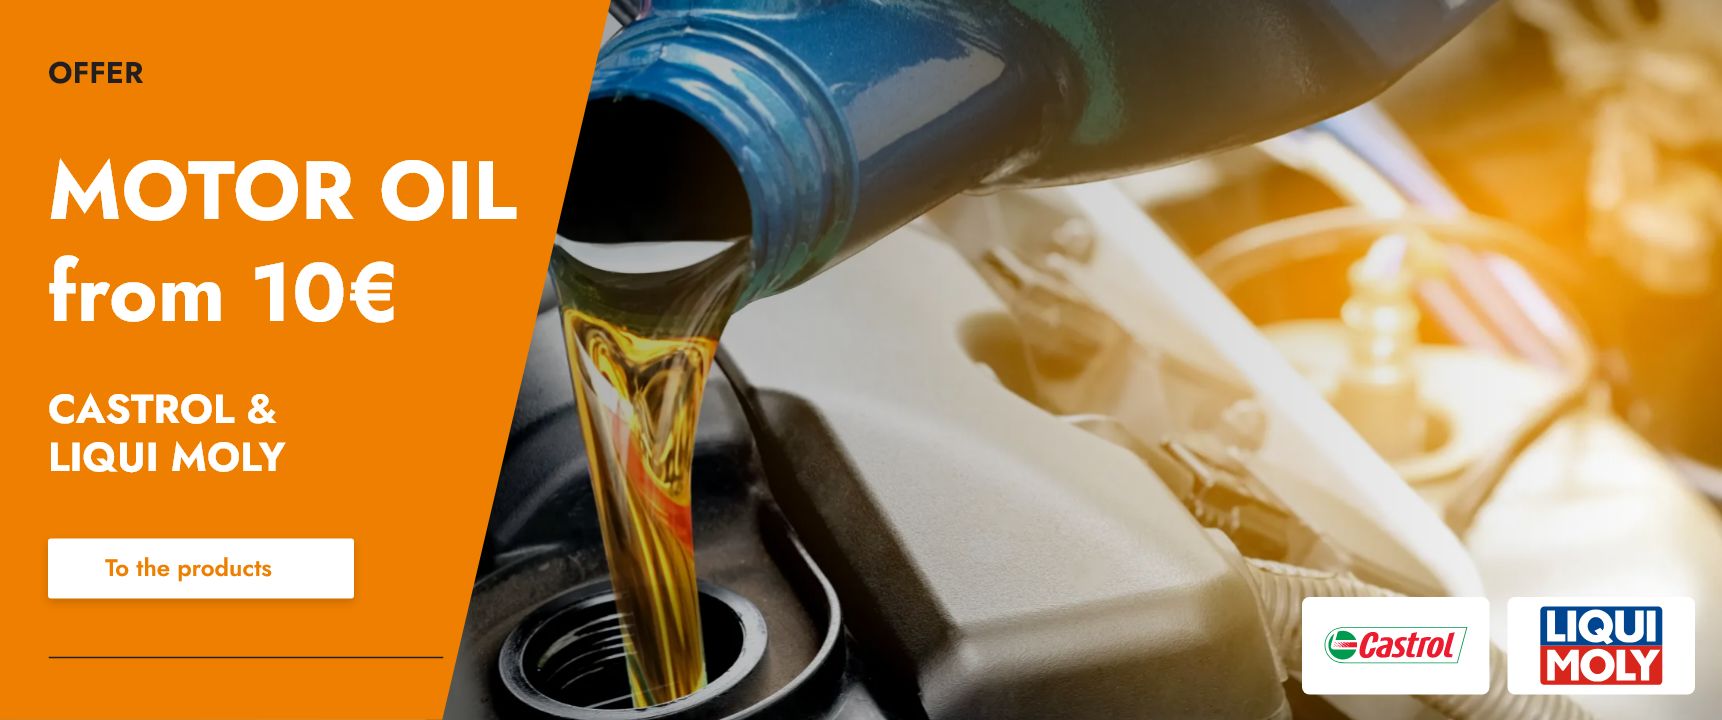 Offer for engine oil from 10 euros from Castrol & LIQUI MOLY